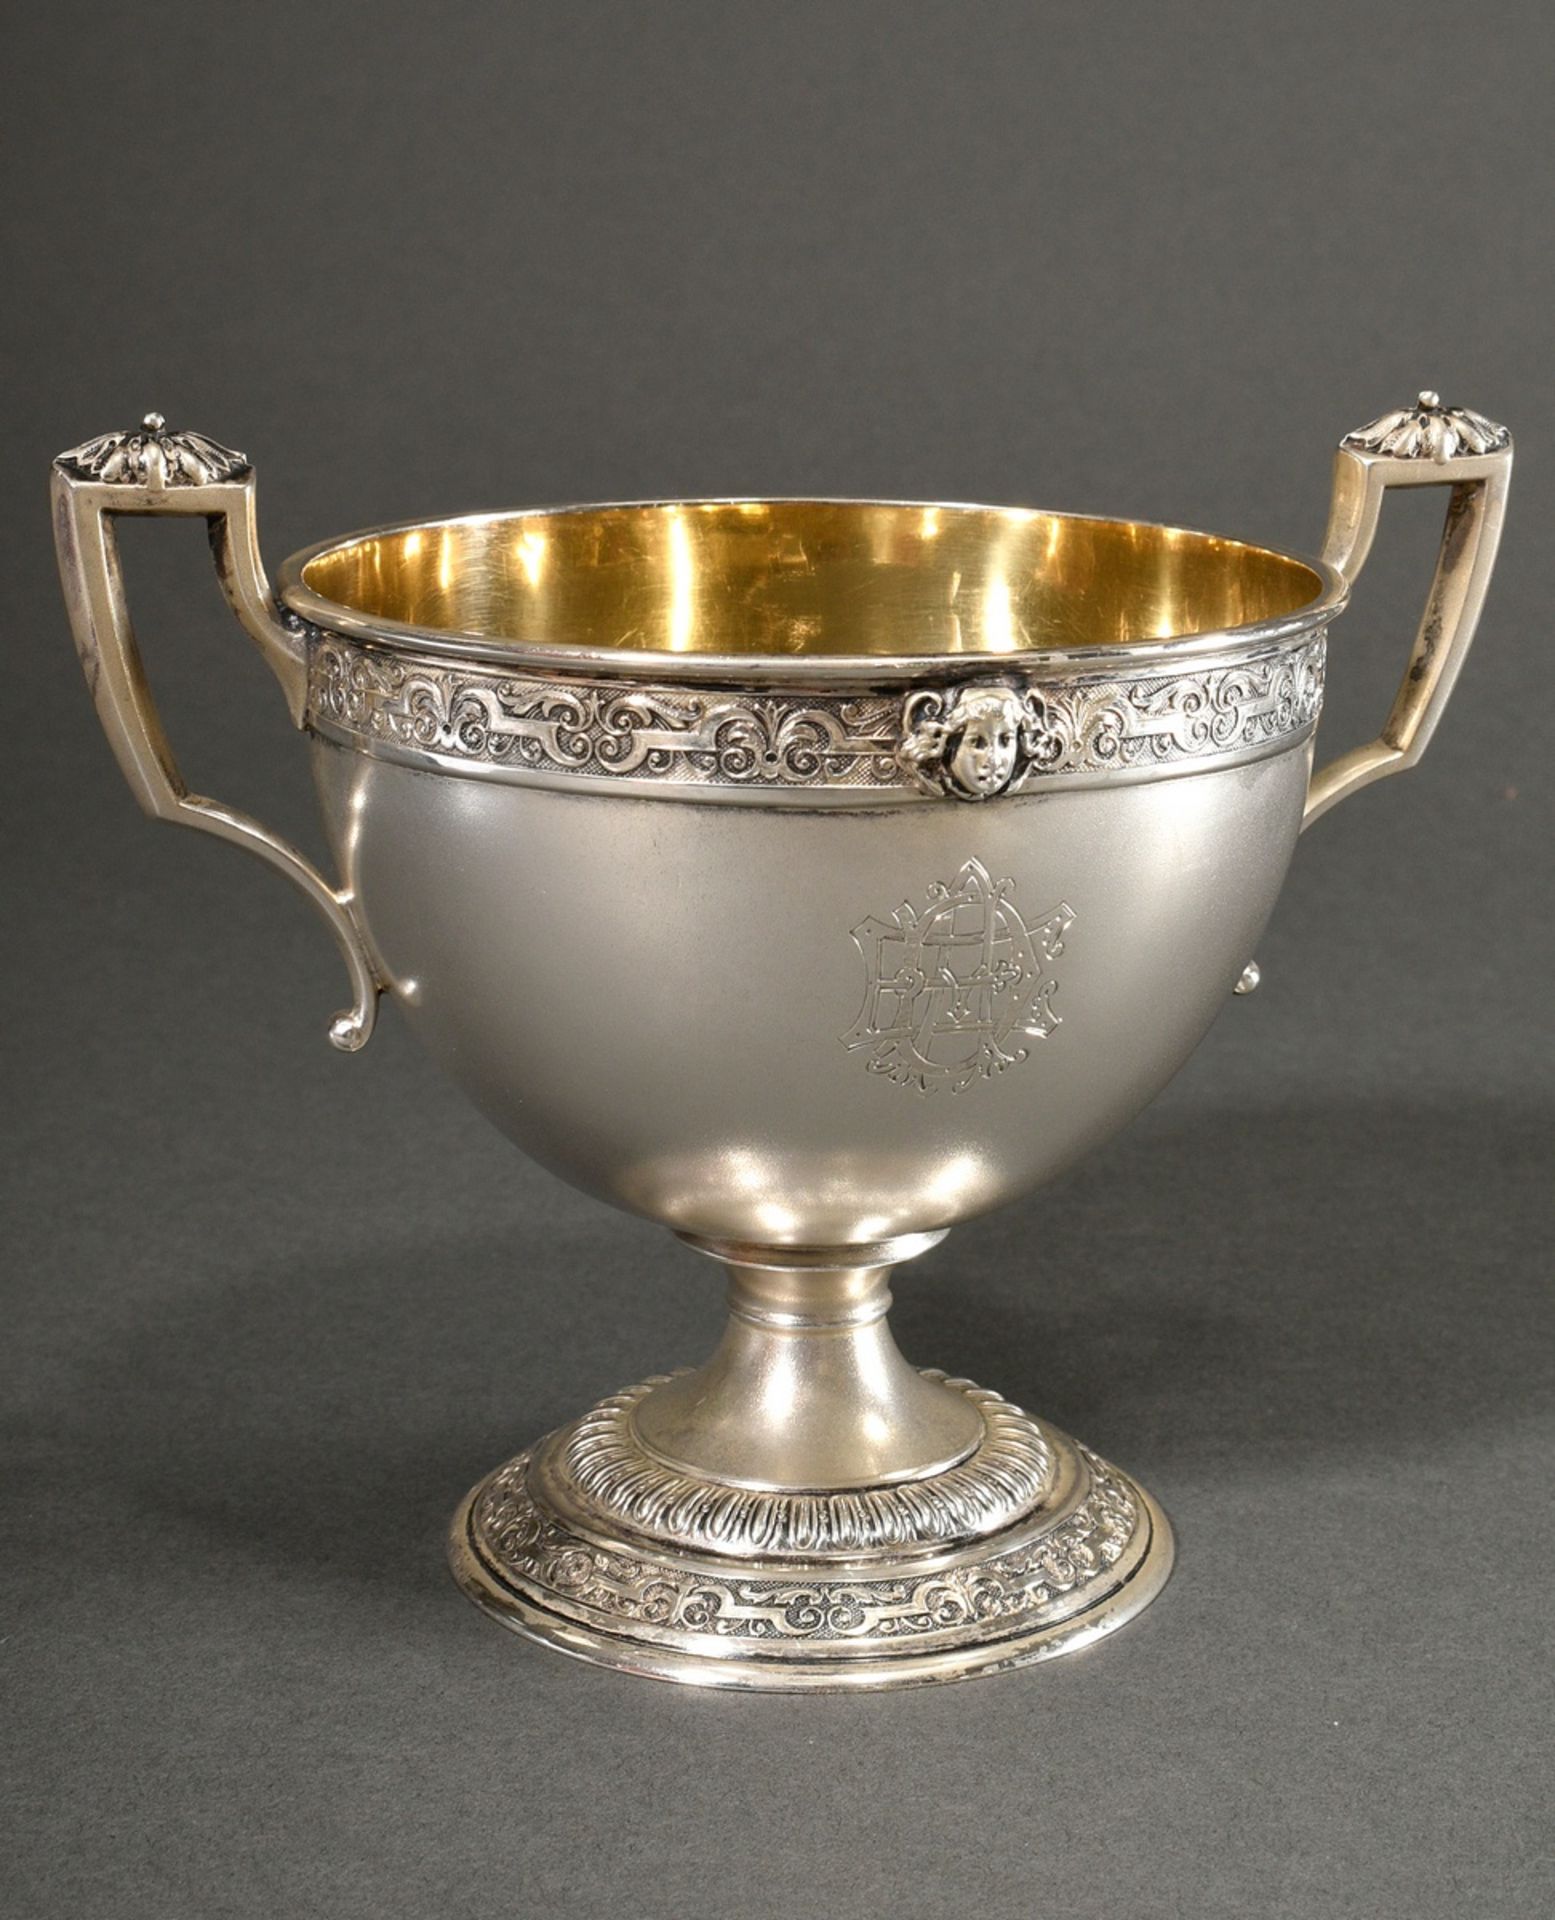 Renaissance-style goblet bowl with raised handles on both sides on a round foot, all-round ornament